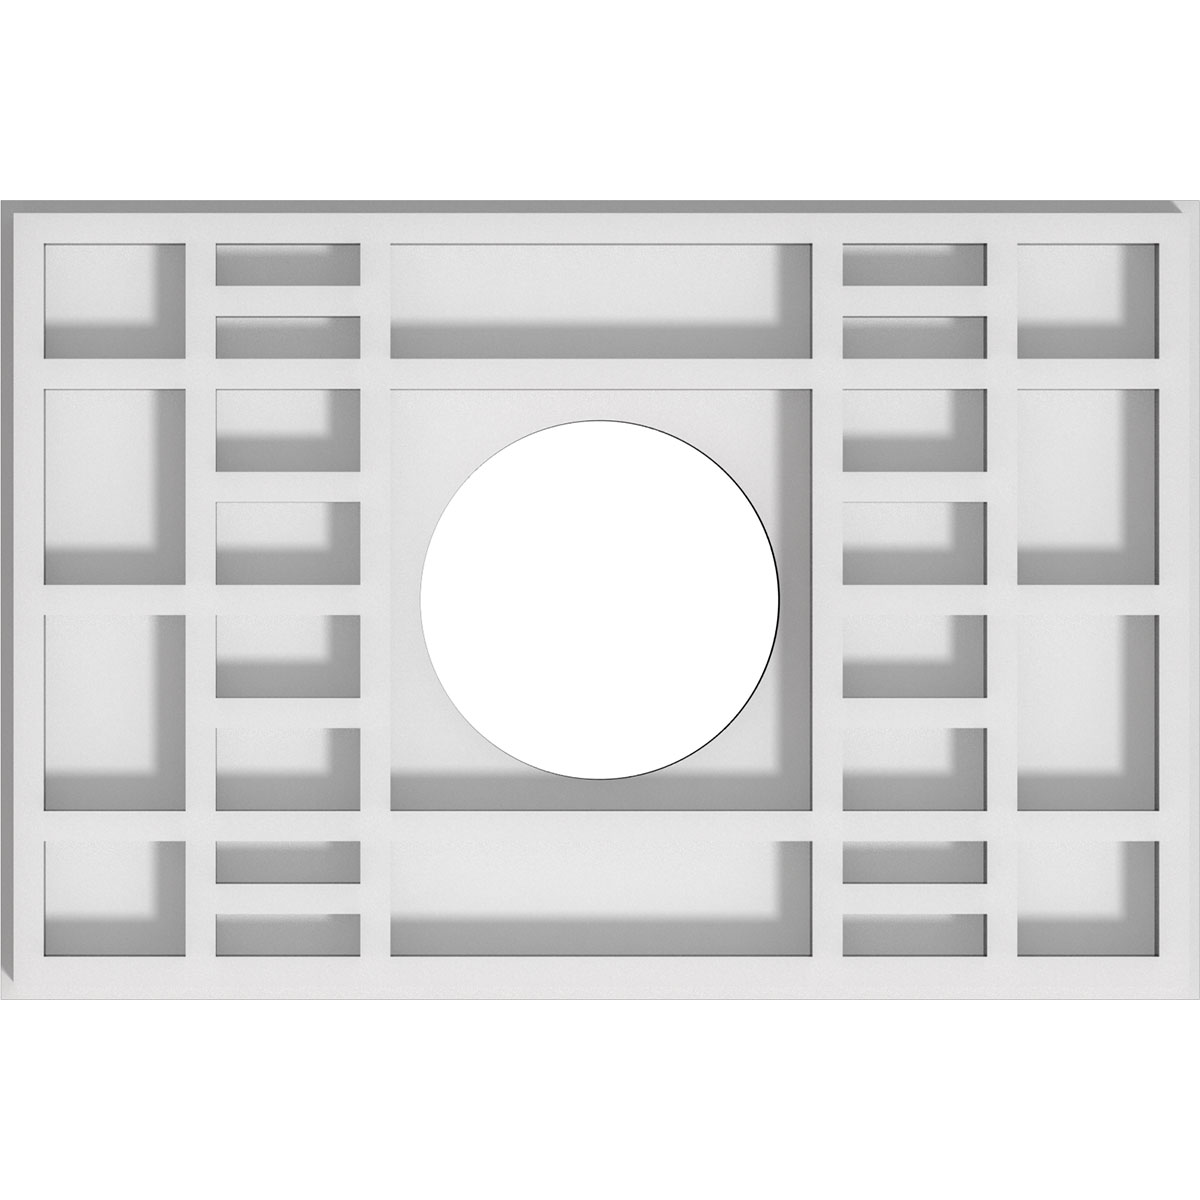 Cmp10x6bx-03000 3 In. Id X 3.5 In. Rectangle Beaux Architectural Grade Pvc Contemporary Ceiling Medallion